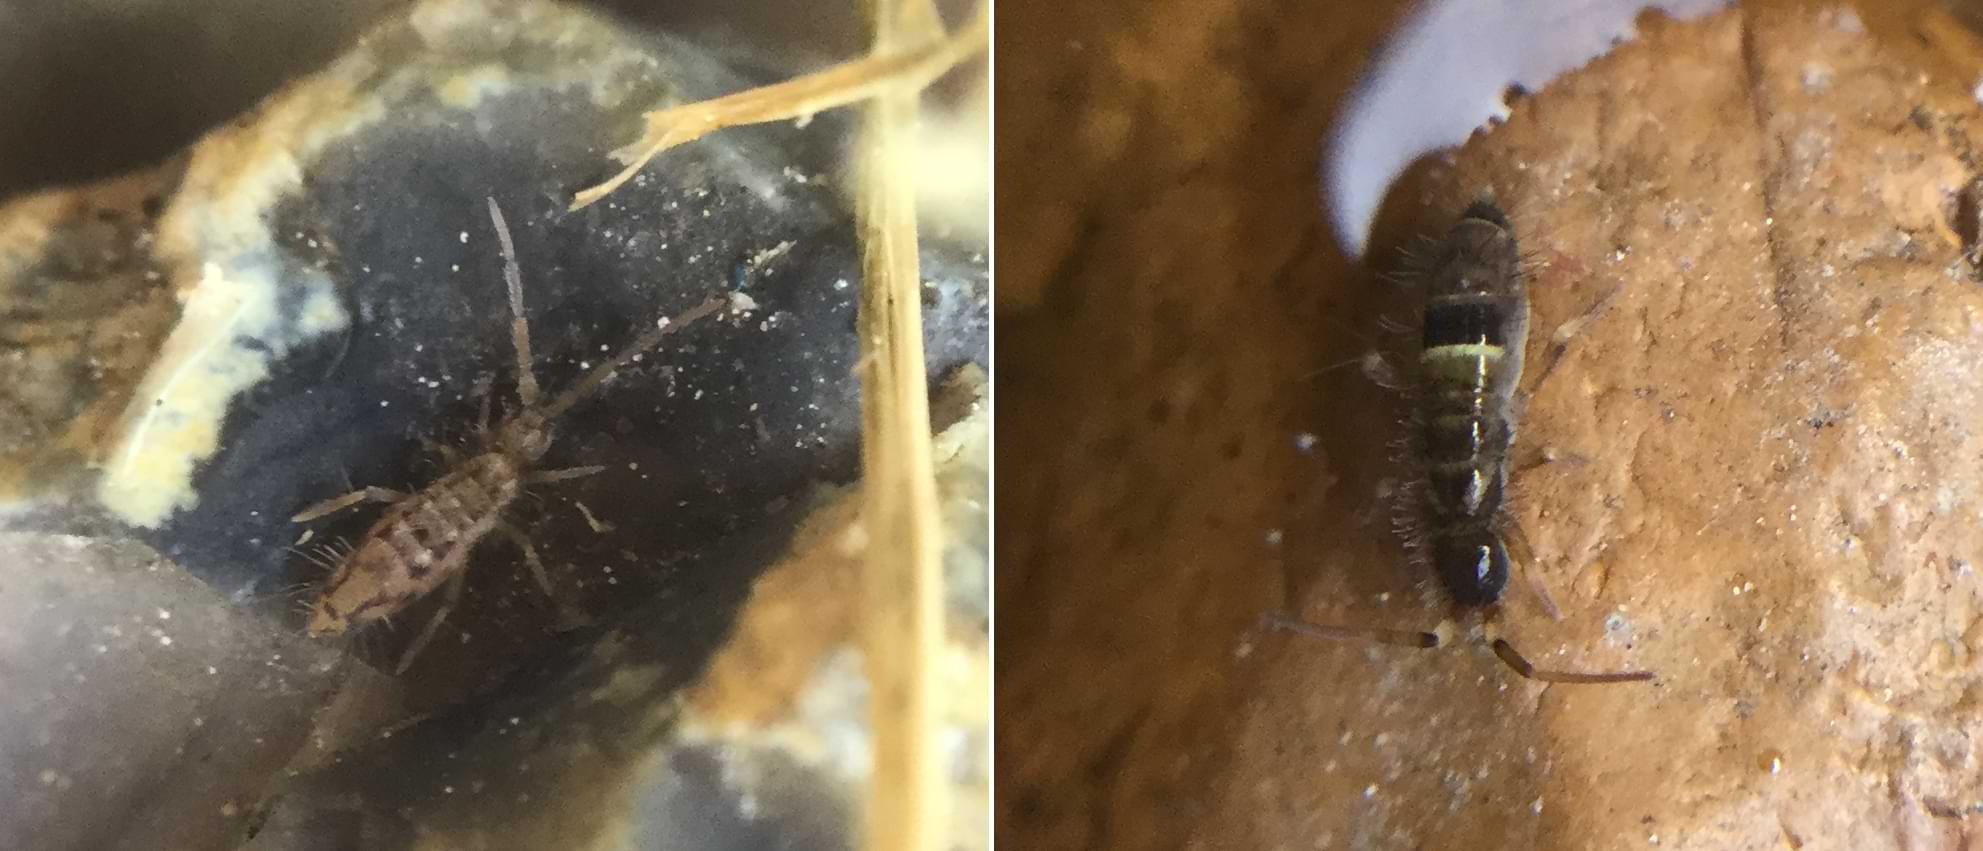 Close up photos of two different species of springtail. The photo of Orchesella cincta shows a clearer look at its colourful banding and also the hairs lining its body. The other photo shows a small grey coloured springtail with dark triangular markings on its segmented thorax.